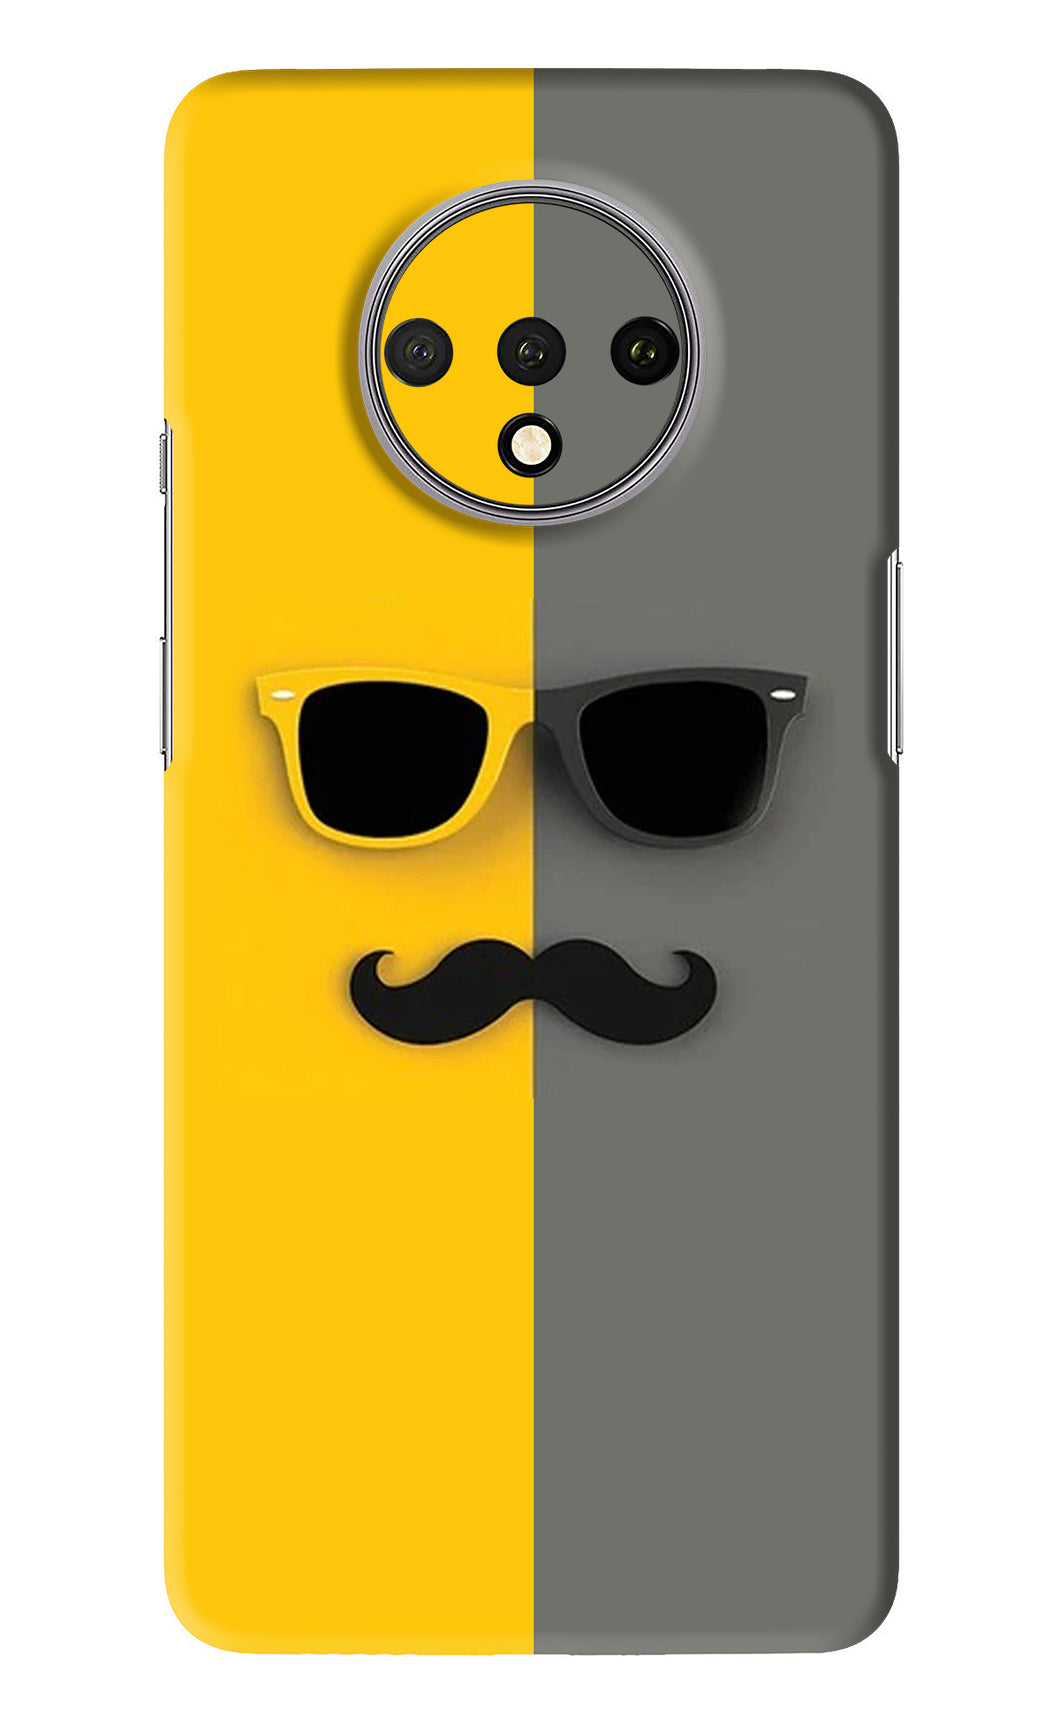 Sunglasses with Mustache OnePlus 7T Back Skin Wrap